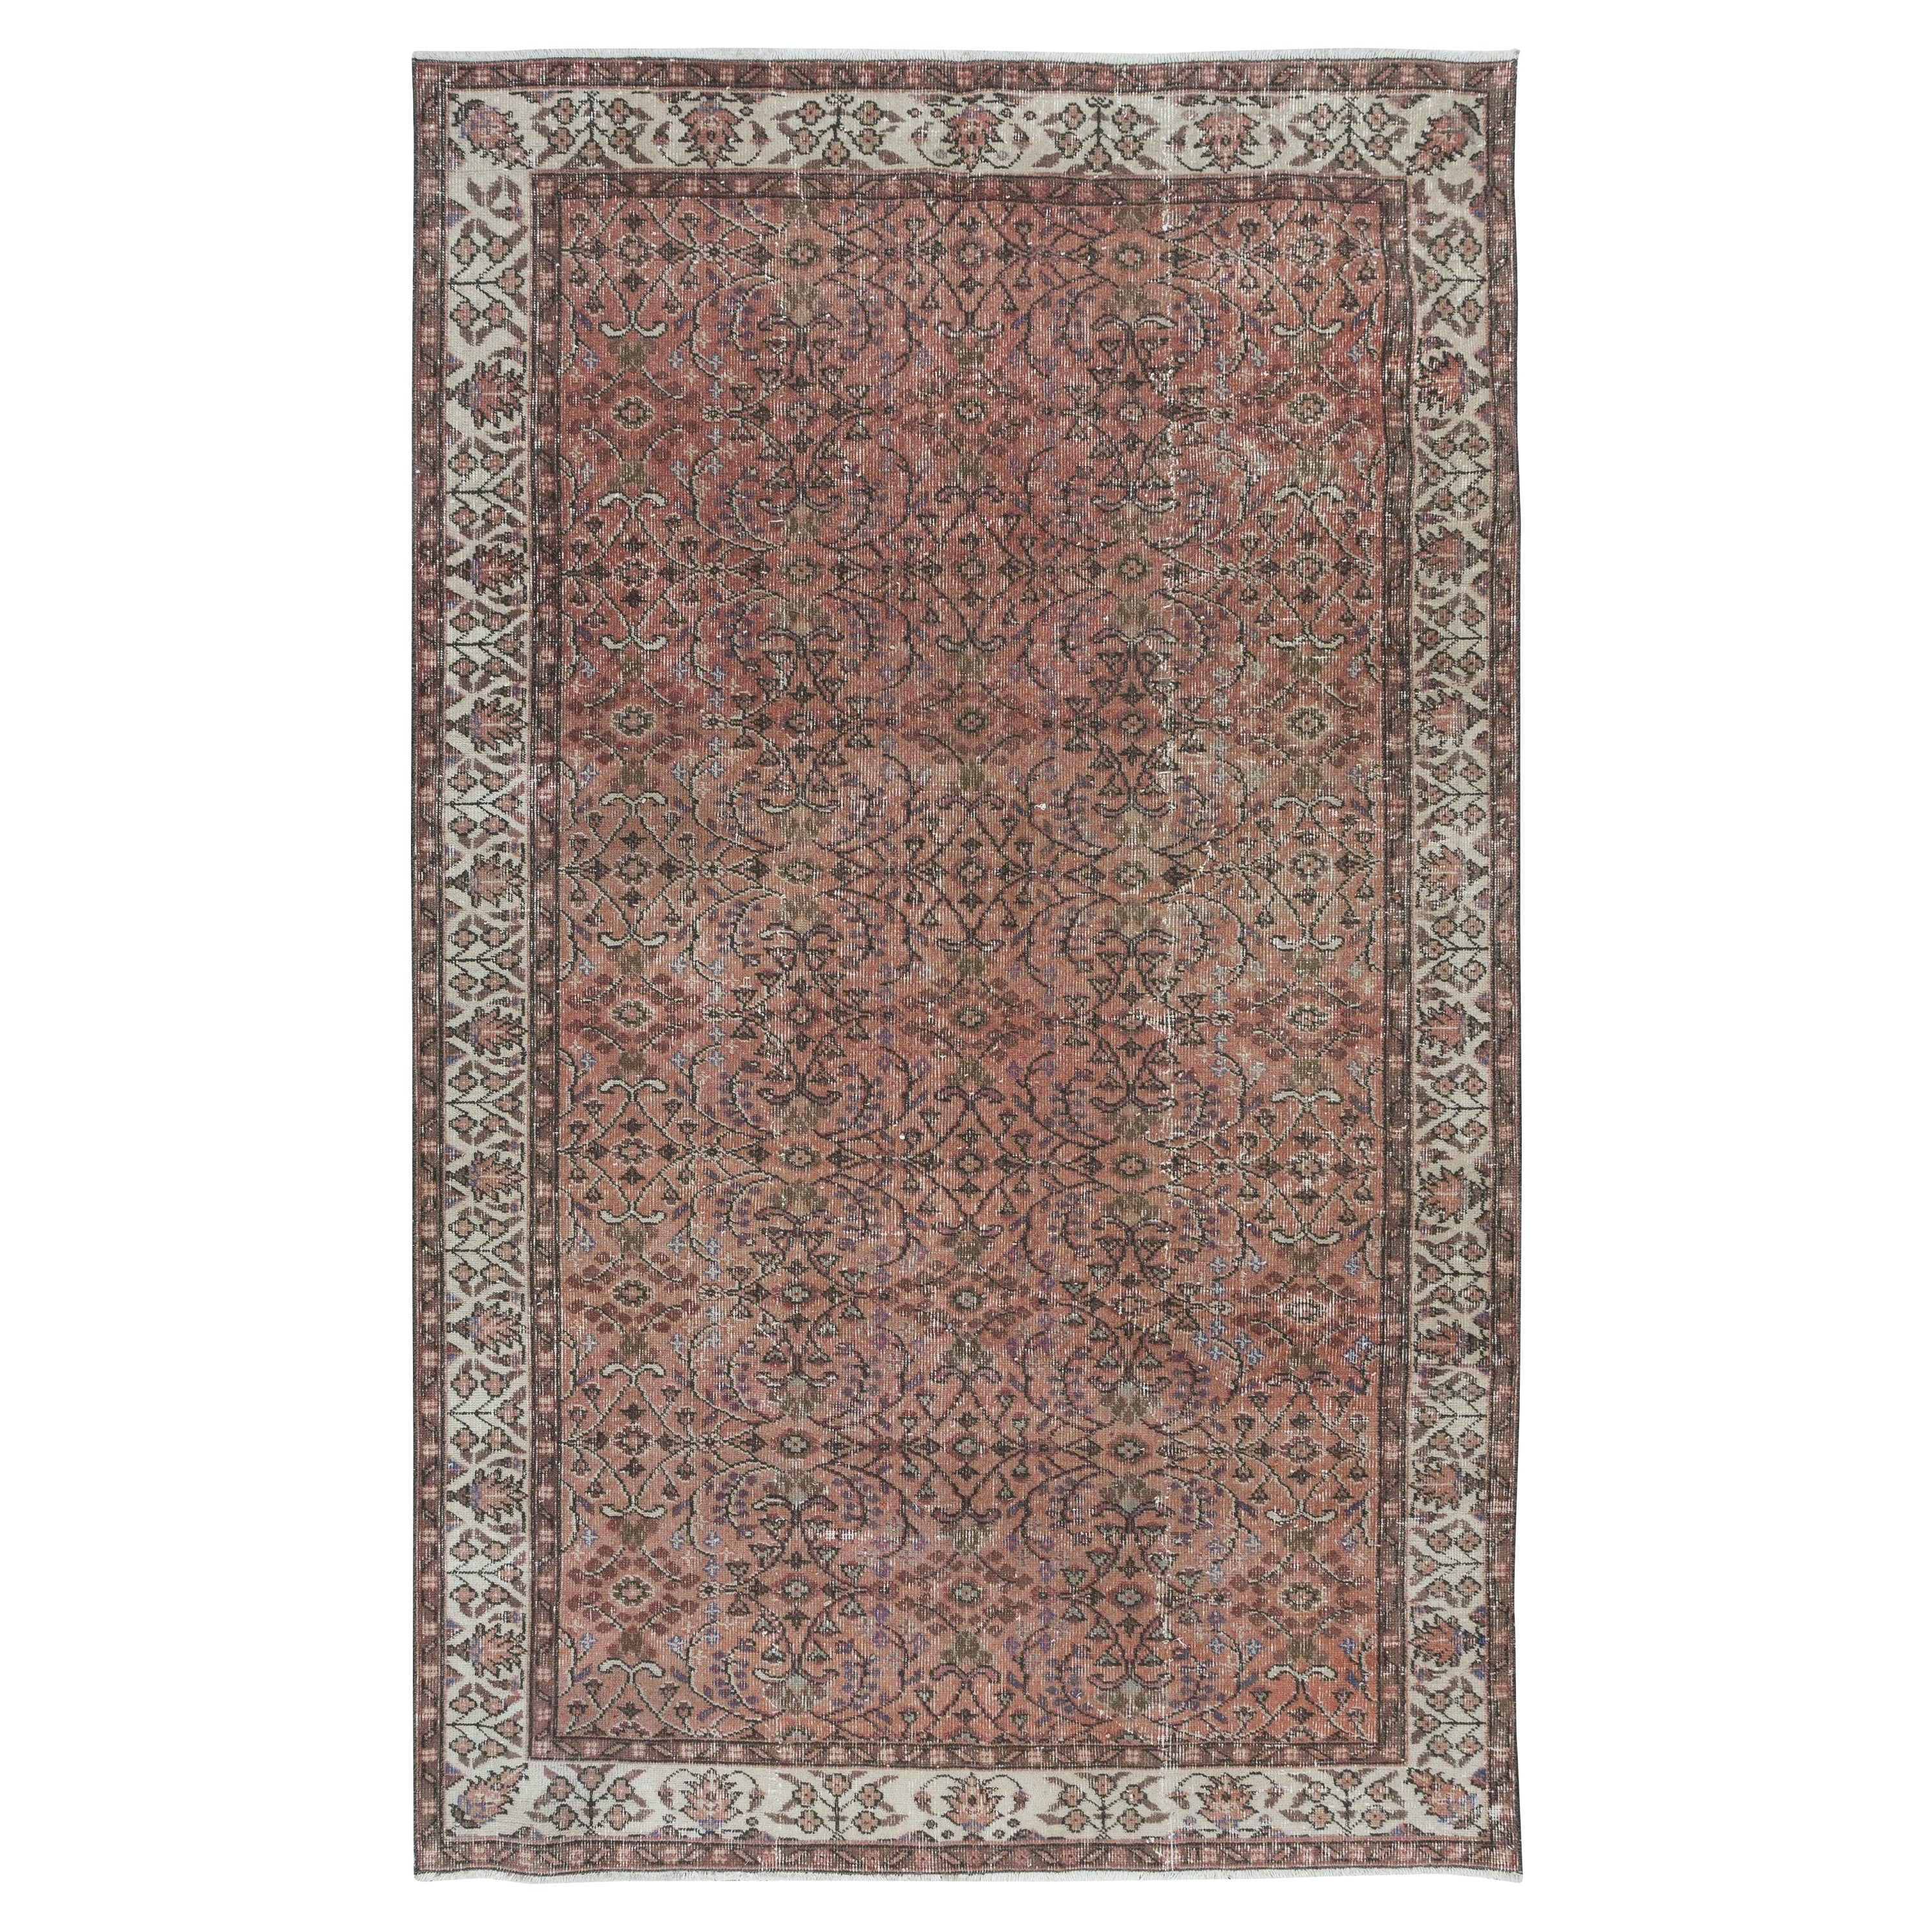 5.4x8.8 Ft Vintage Turkish Area Rug in Red & Beige, Hand Knotted Floral Carpet For Sale